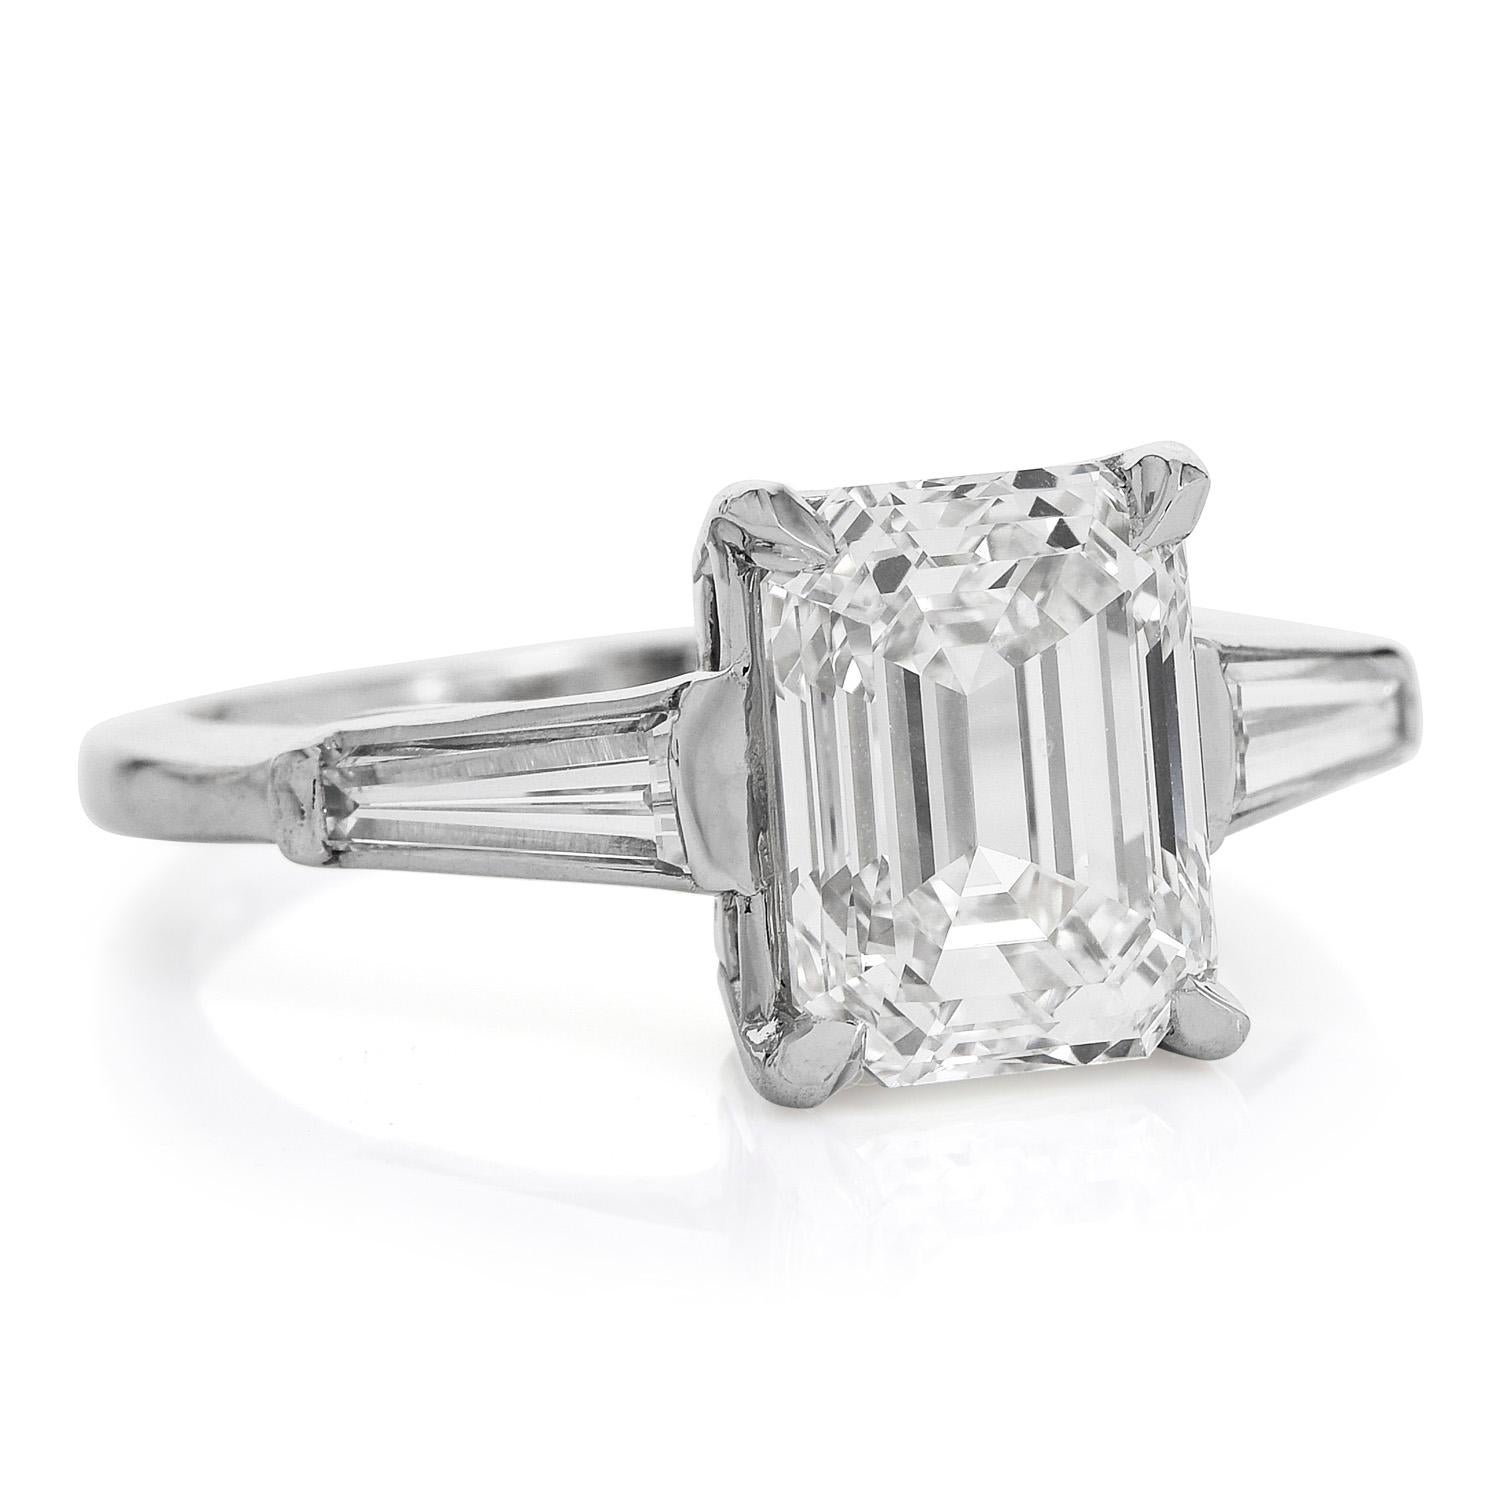 Modern 3.41cts GIA Emerald-Cut Diamond Baguette Platinum Engagement Ring For Sale